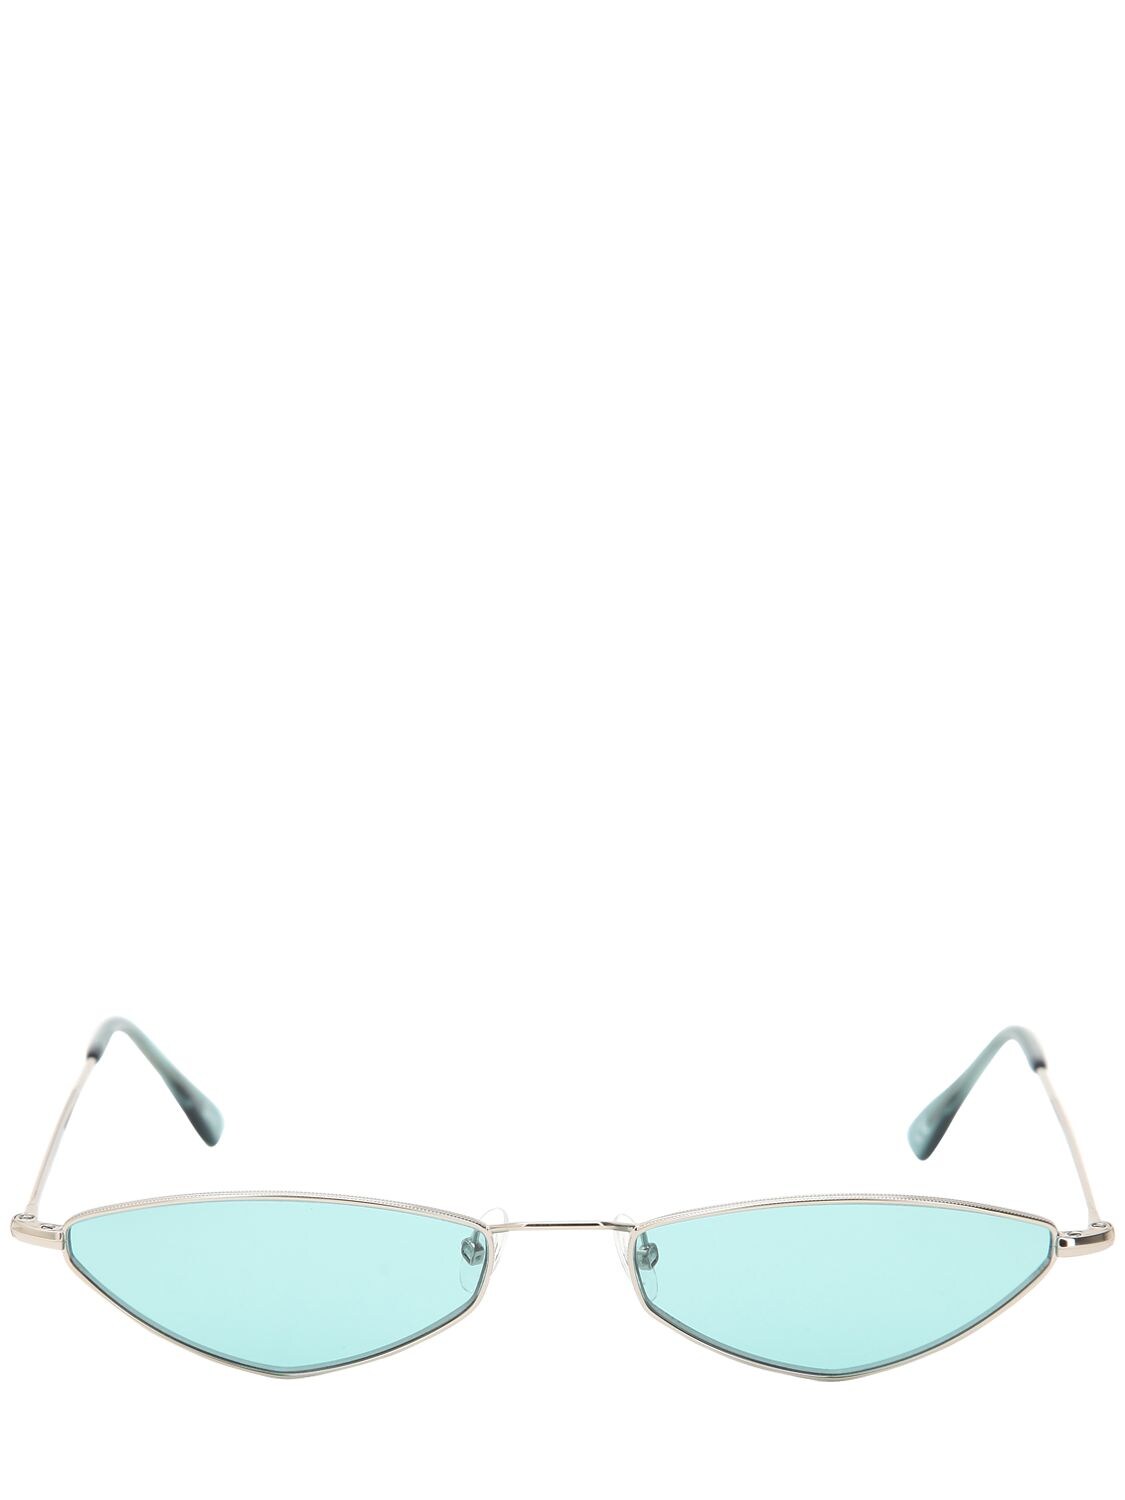 Andy Wolf Eliza Sunglasses In Green